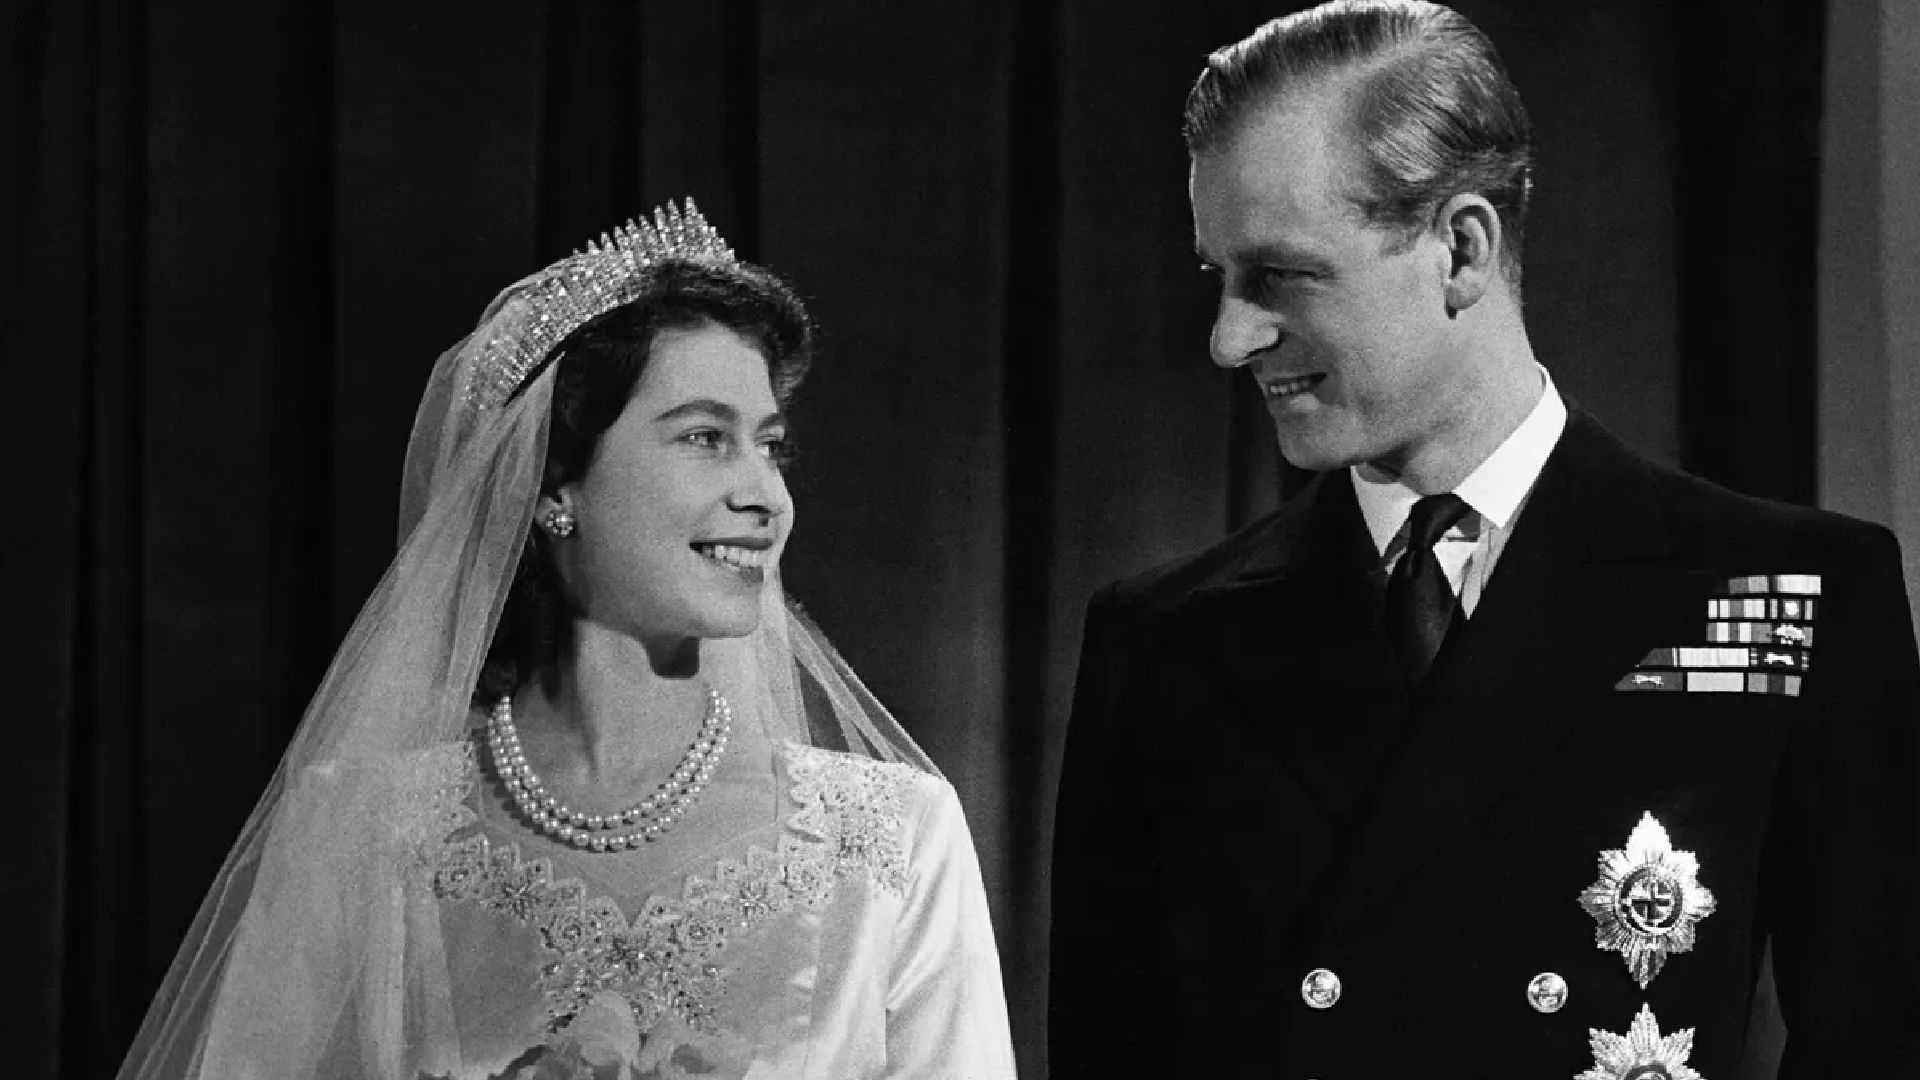 <p>                     Four months after announcing their engagement, Princess Elizabeth and Prince Philip married at Westminster Abbey. A staggering 2,000 guests were invited to the wedding, which was broadcast by BBC Radio to 200 million people globally. Queen Elizabeth and Prince Philip couldn't have looked more in love on their special day.                   </p>